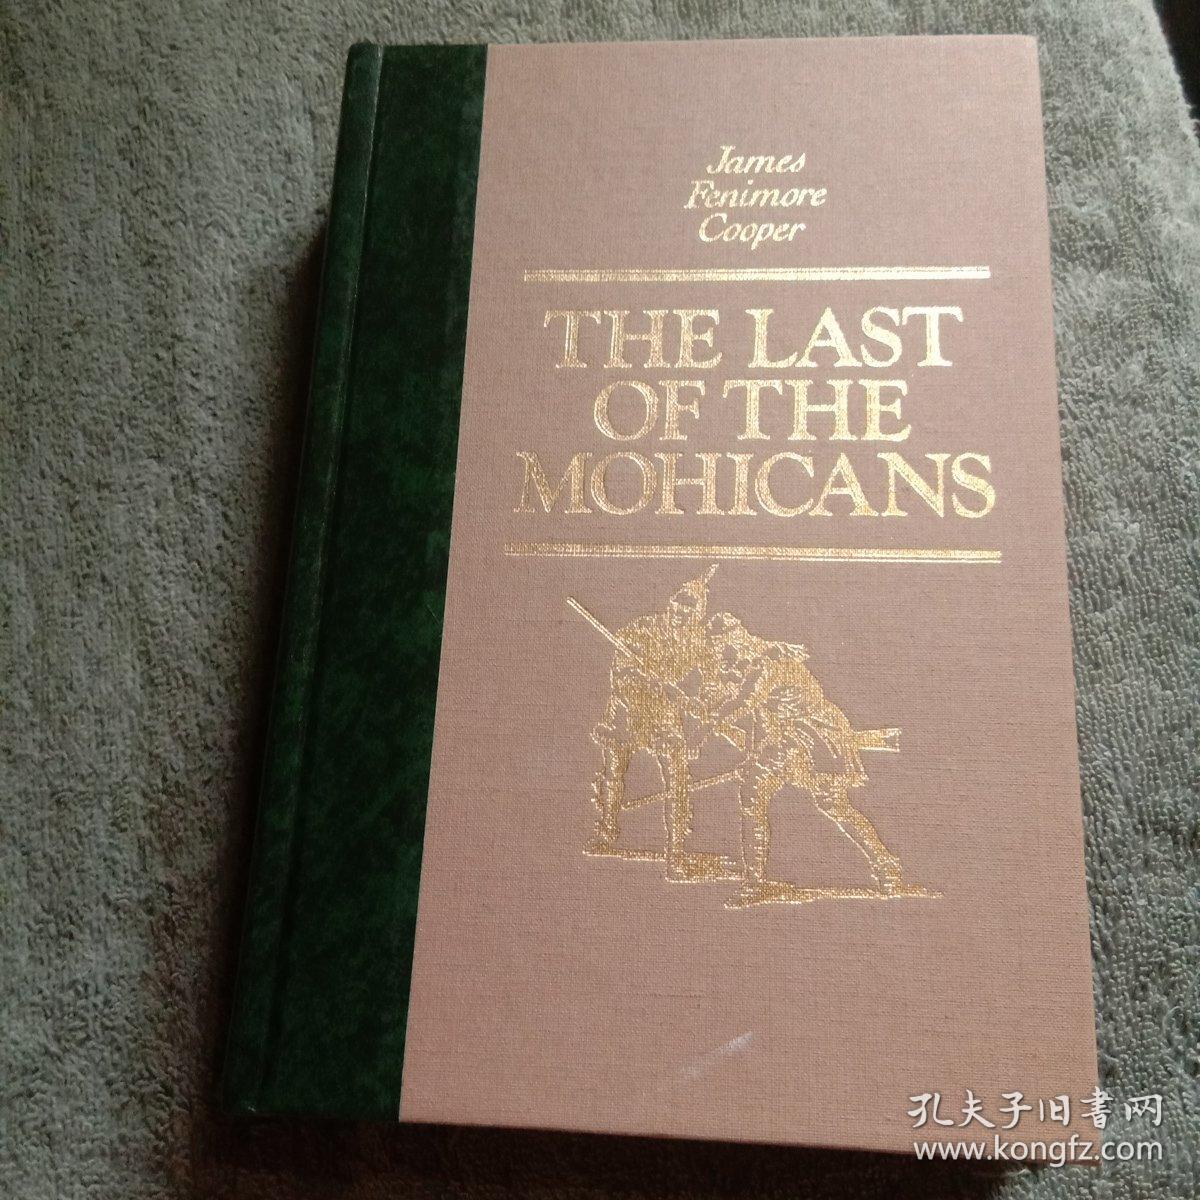 The Last of the Mohicans 《最后的莫西干人》james fenimore cooper 库珀 Reader's Digest 插图 布面 精装版 16开本 品好